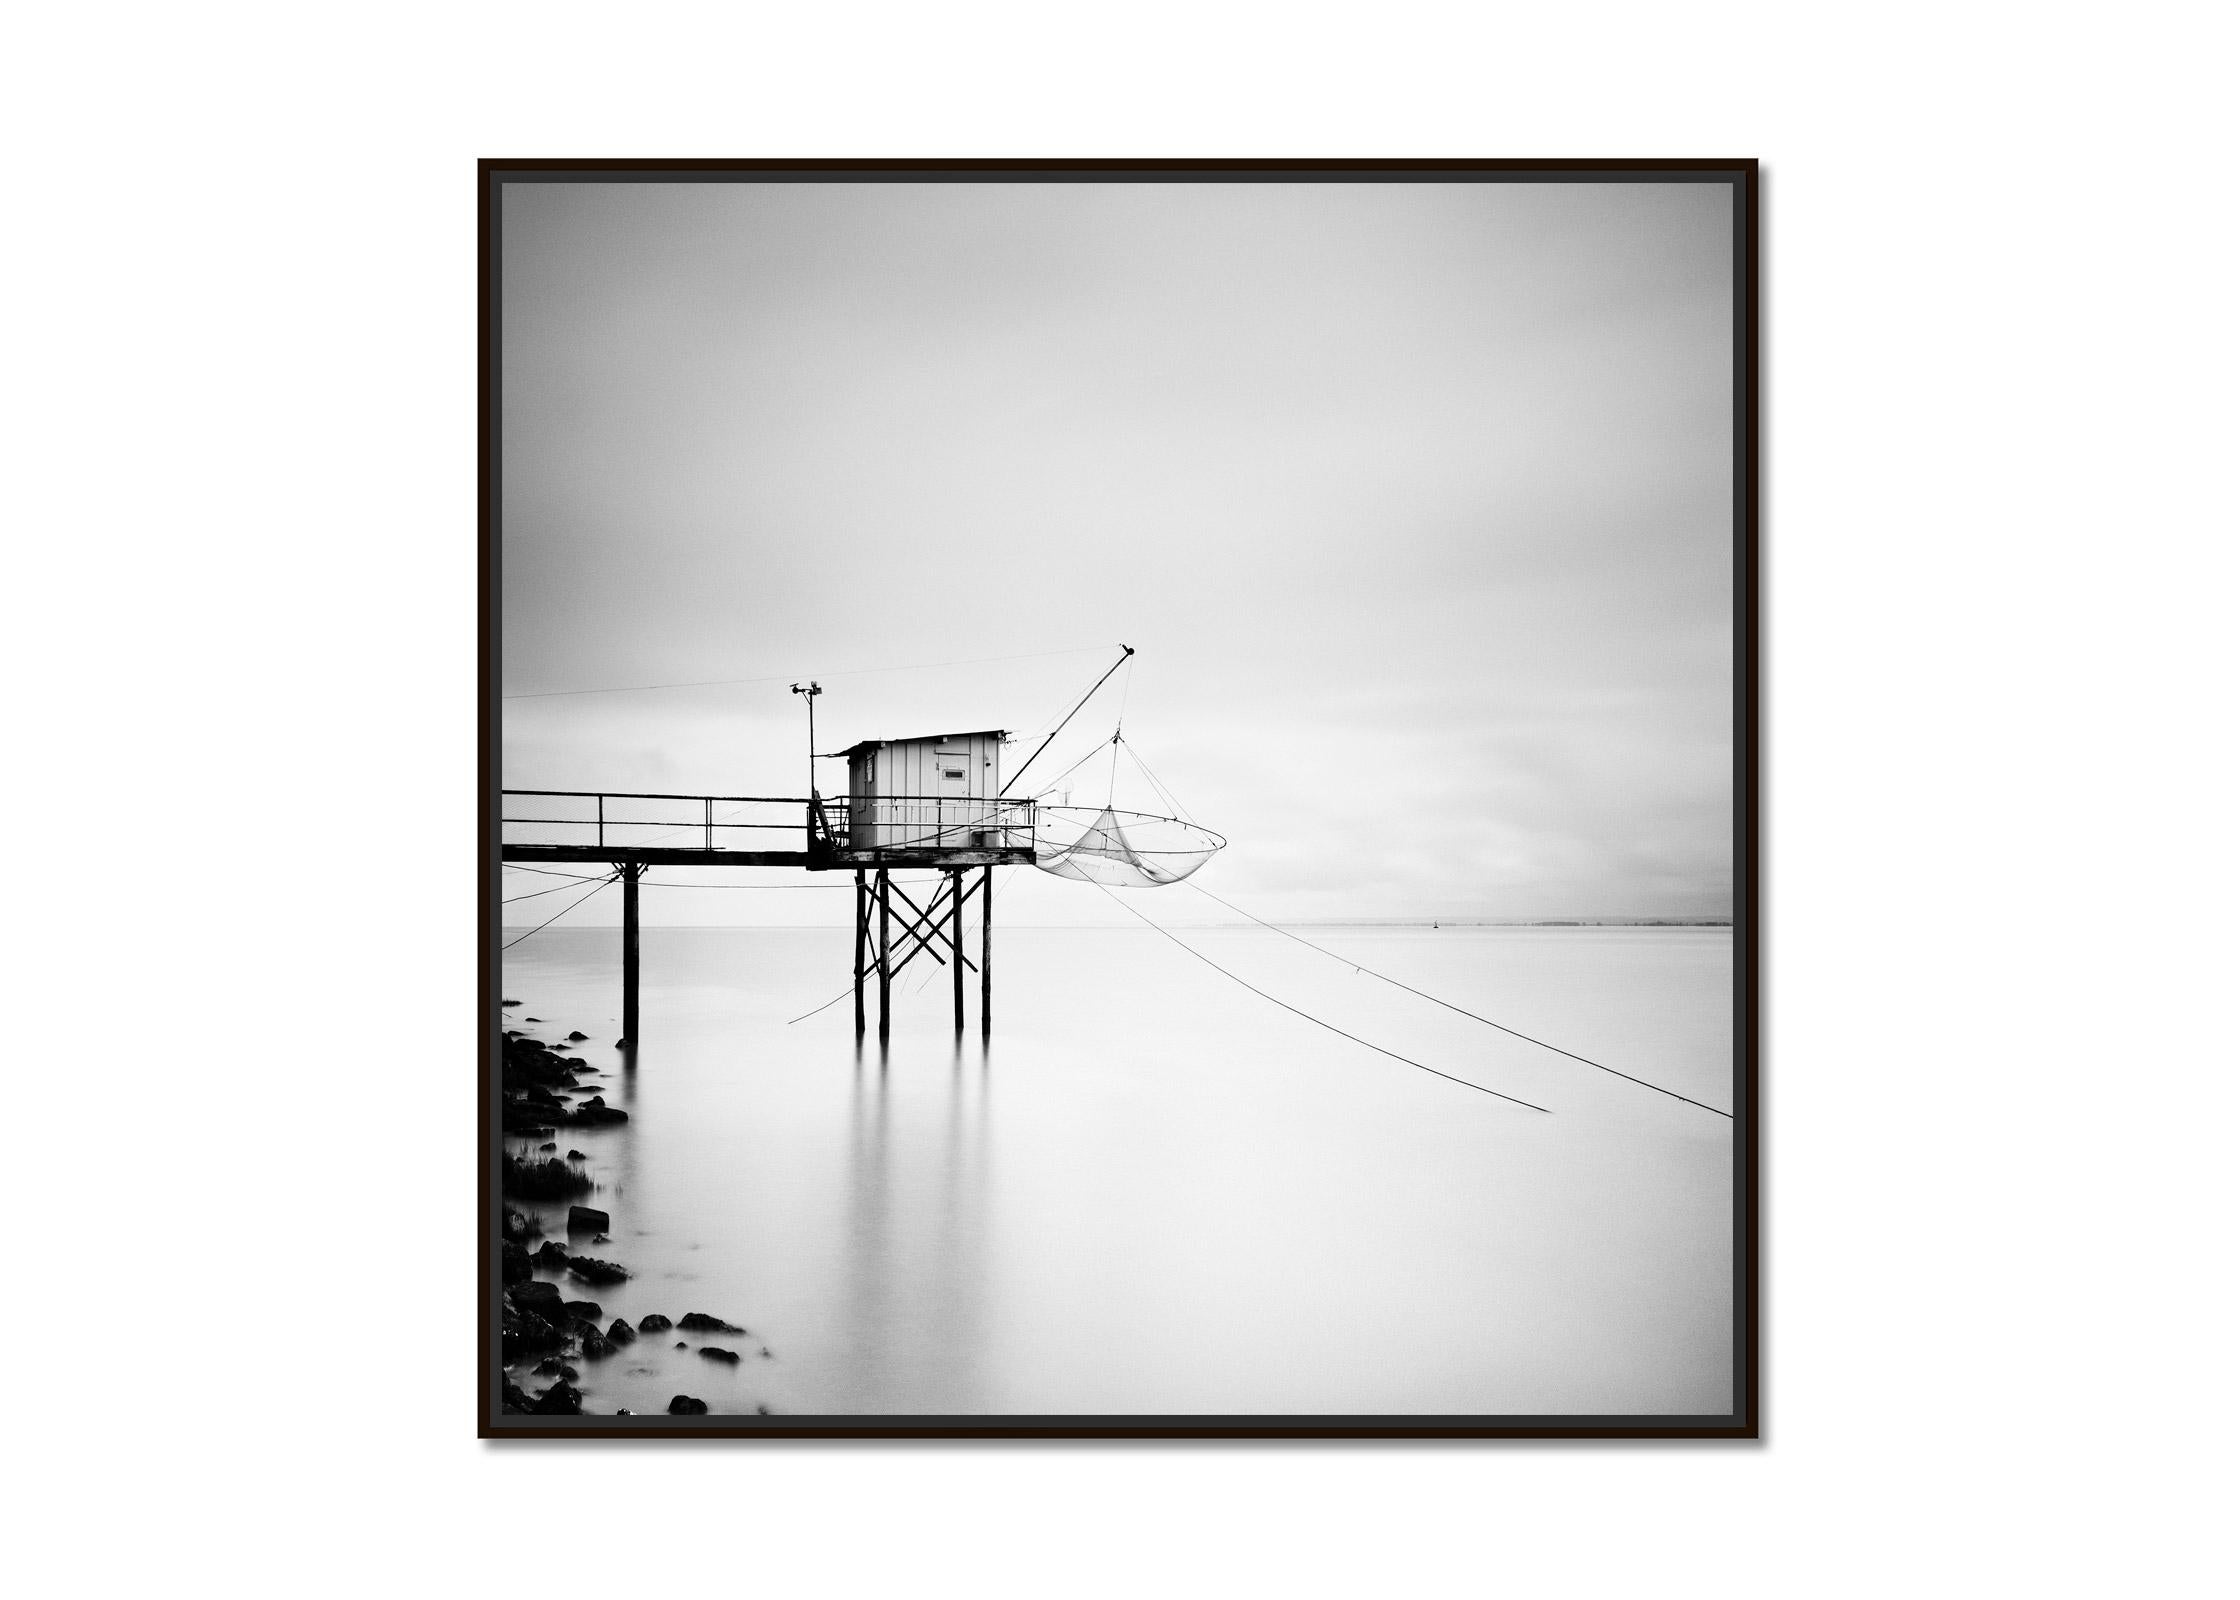 Wooden fishing Hut on Stilts, France, black and white art waterscape photography - Photograph by Gerald Berghammer